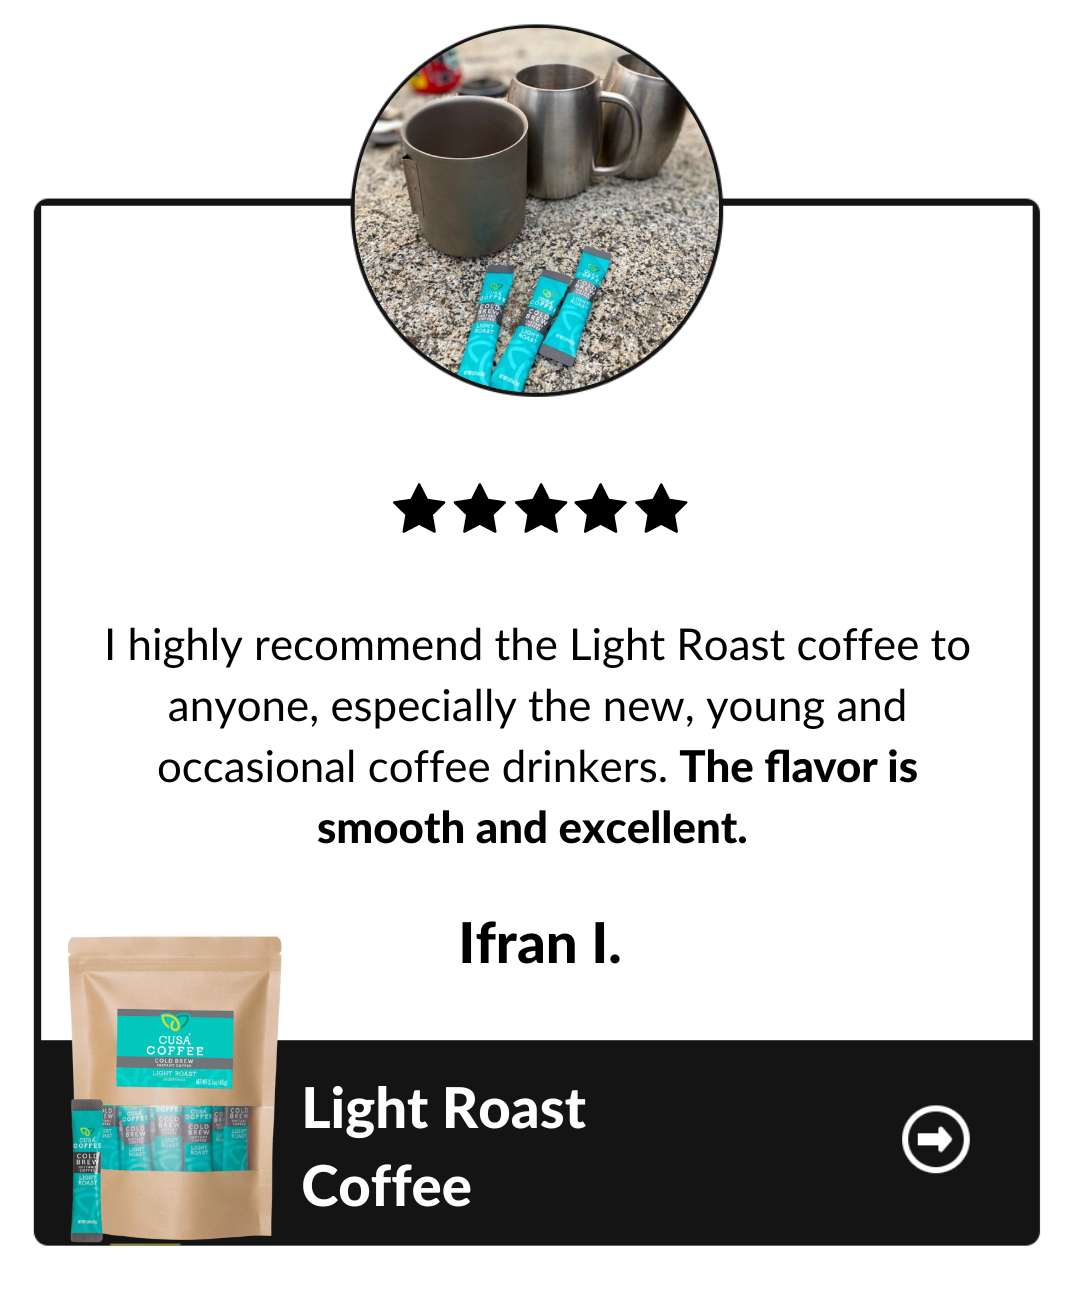 I highly recommend the Light Roast coffee to anyone, especially the new, young and occasional coffee drinkers. The flavor is smooth and excellent Ifran I, Light Roast Coffee testimonial